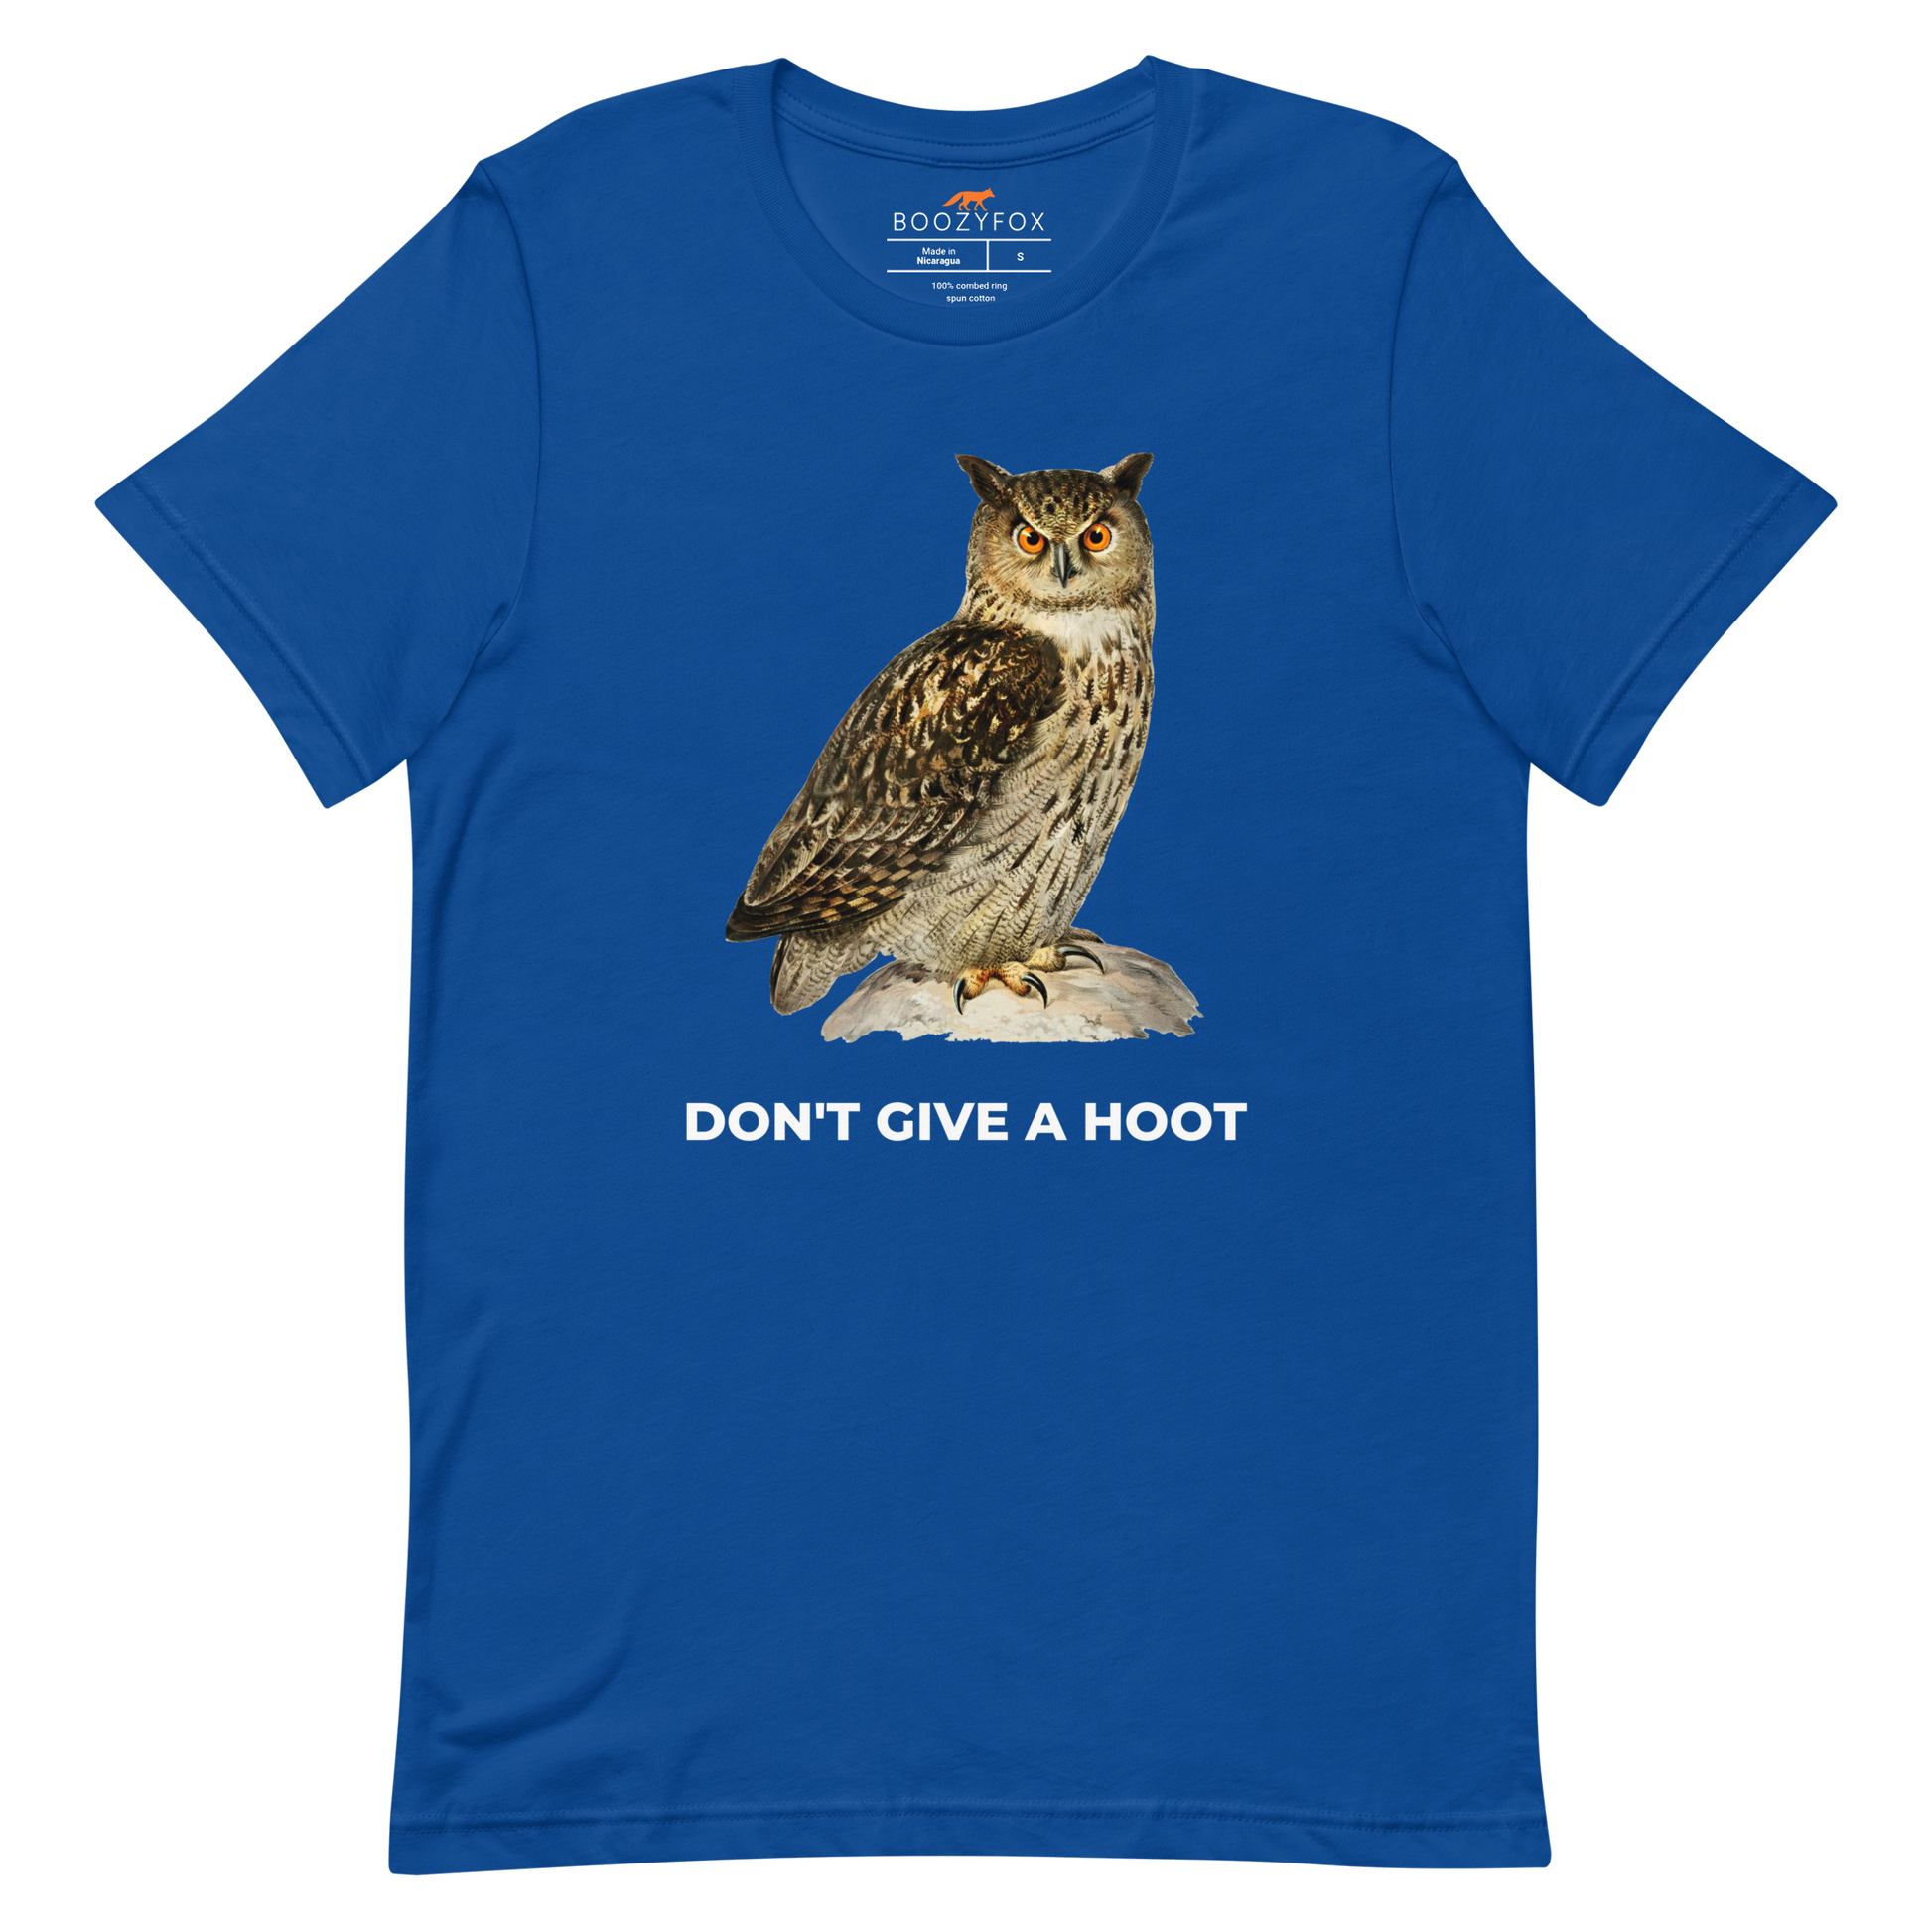 True Royal Blue Premium Owl T-Shirt featuring a captivating Don't Give A Hoot graphic on the chest - Funny Graphic Owl Tees - Boozy Fox